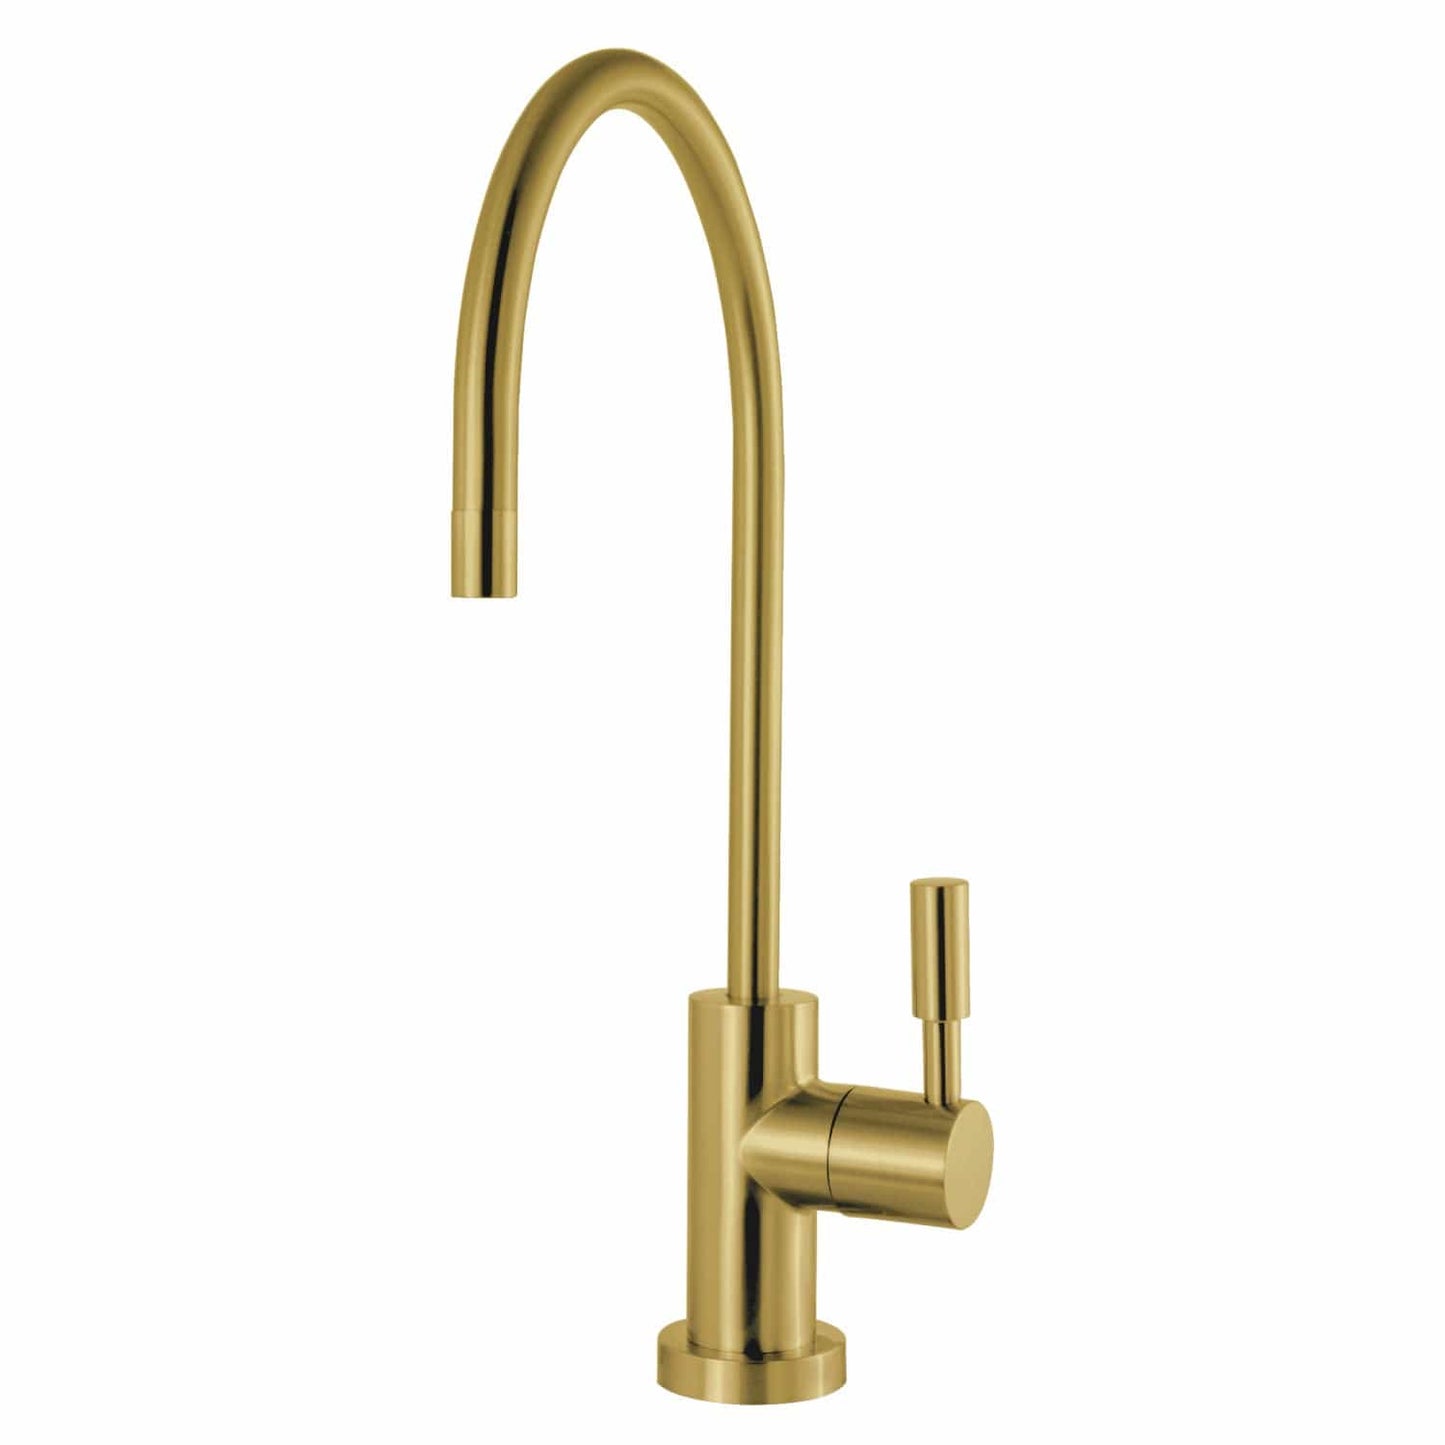 KINGSTON Brass Concord Reverse Osmosis System Filtration Water Air Gap Faucet - Brushed Brass